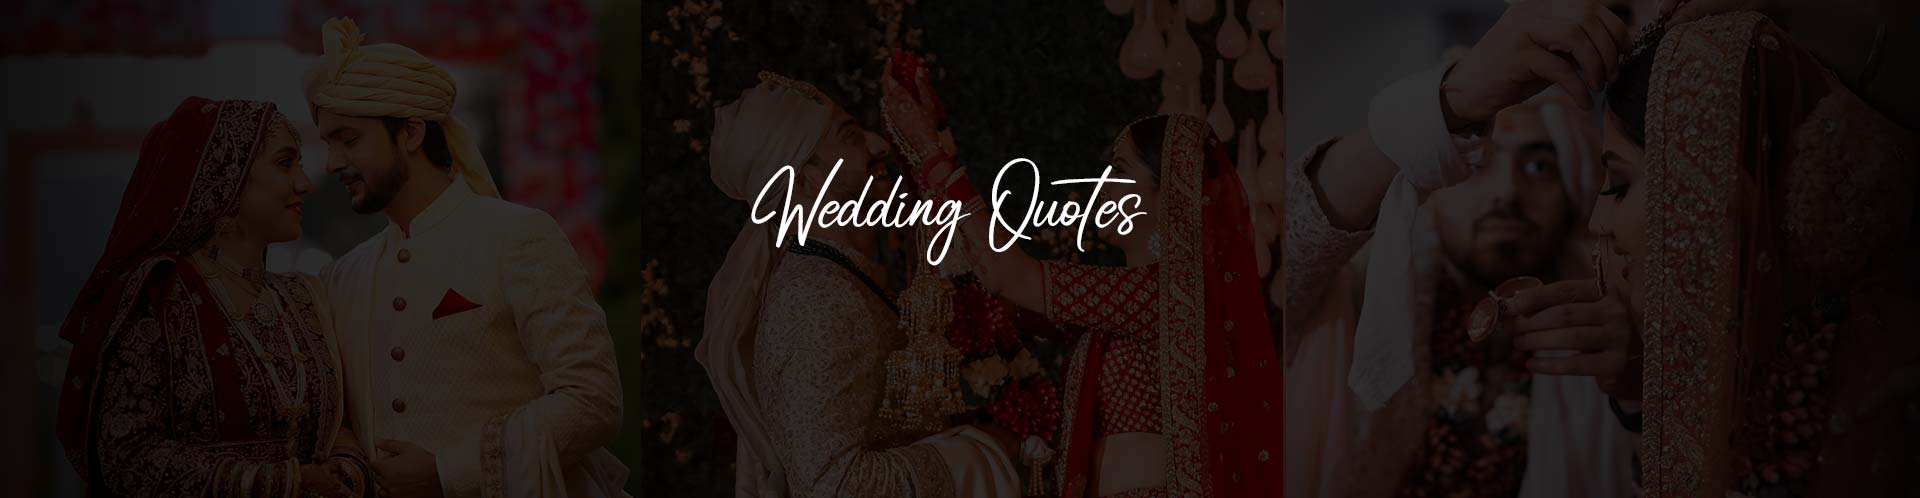 Top 101 Indian Wedding Quotes, Wishes & Messages - FNP Venues